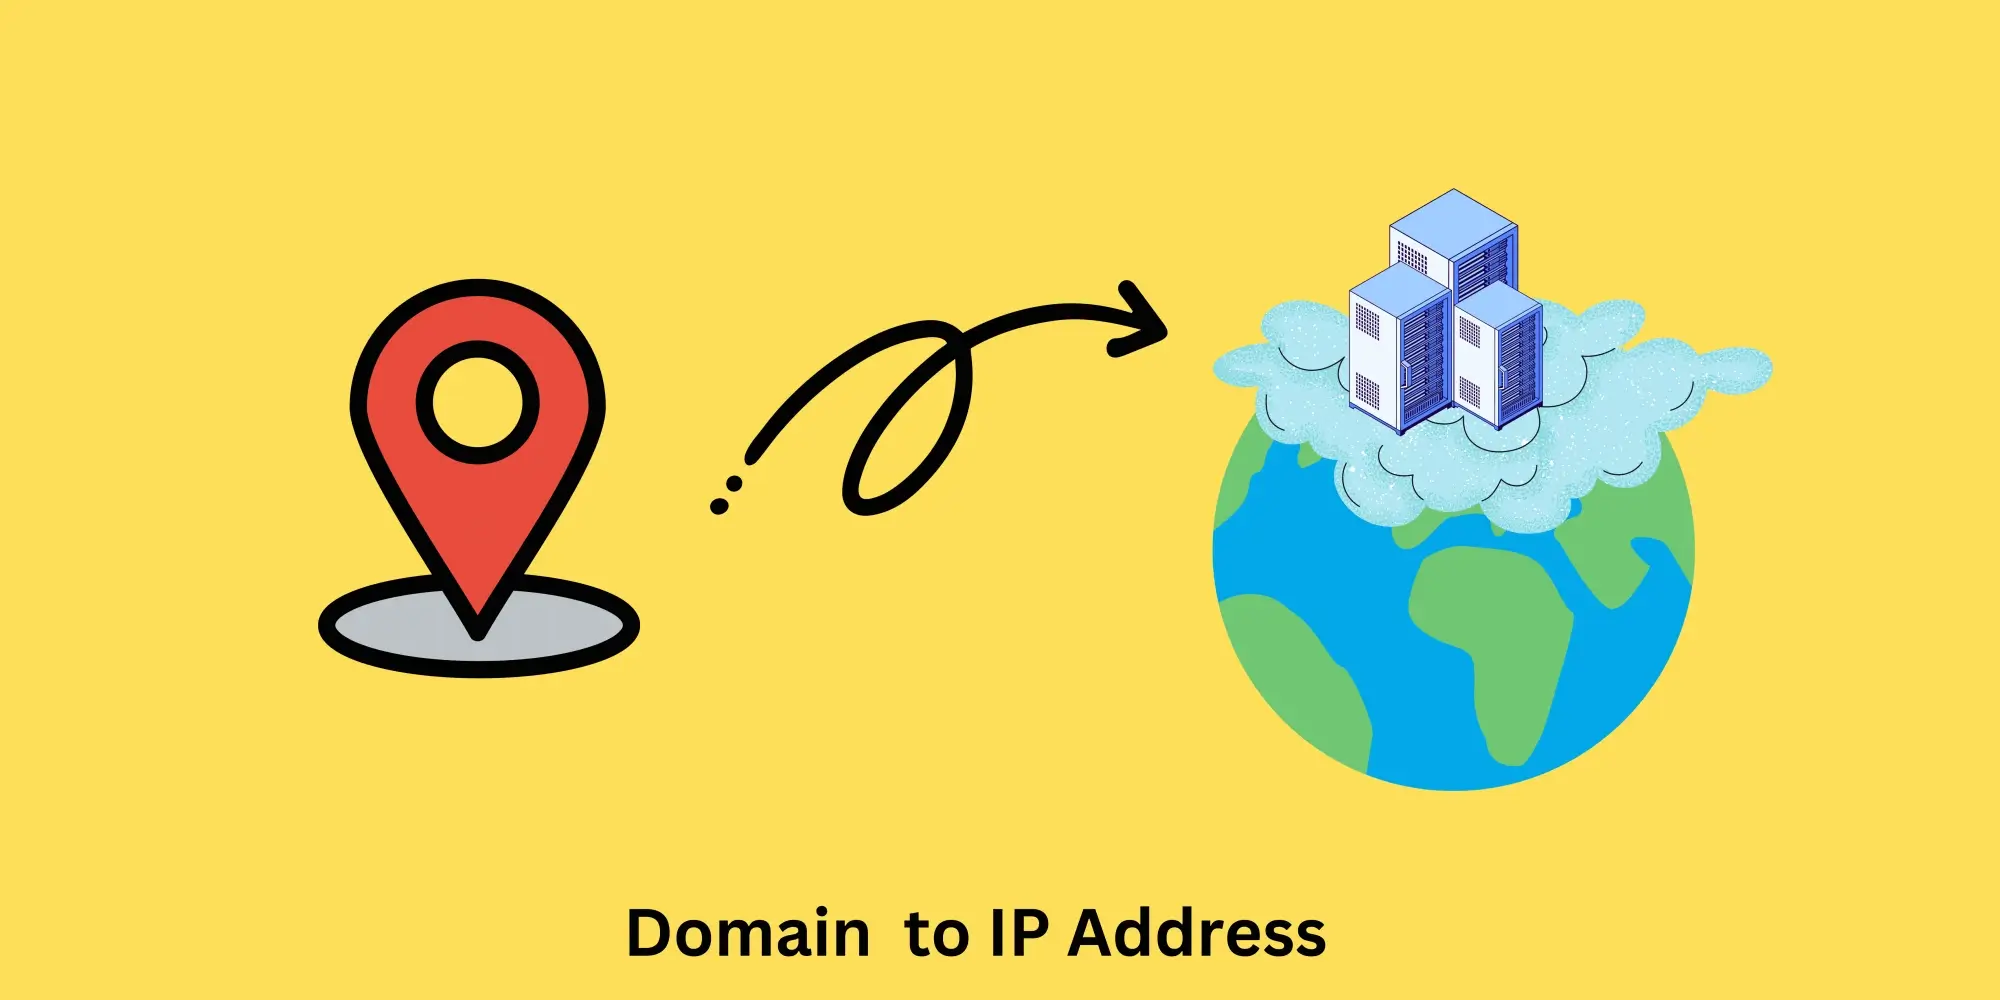 Illustration of domain to IP tools